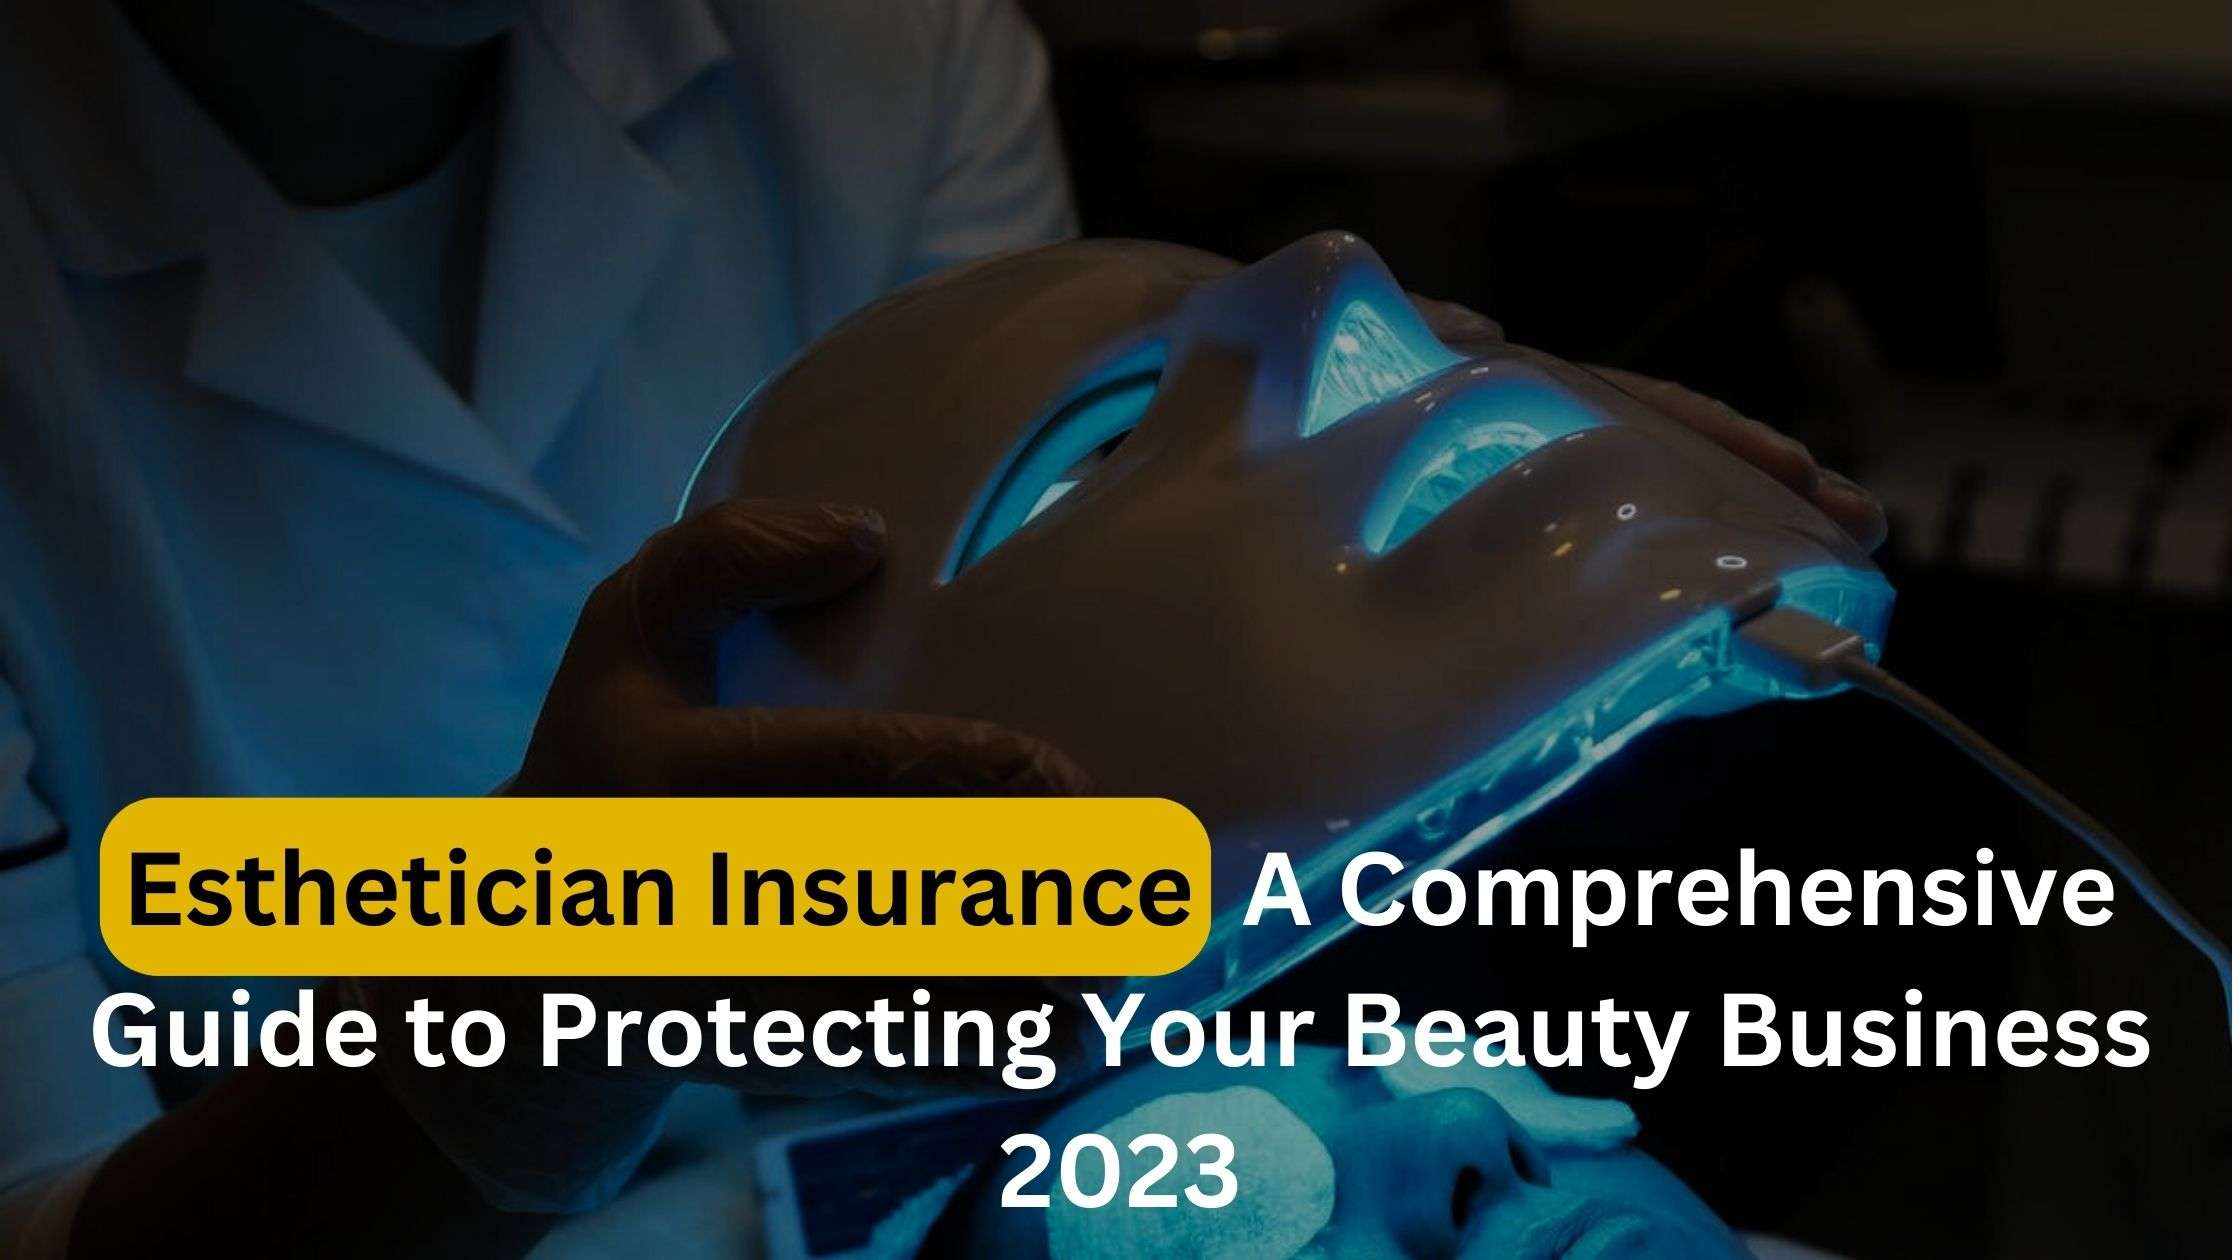 Esthetician Insurance: A Comprehensive Guide to Protecting Your Beauty Business 2023